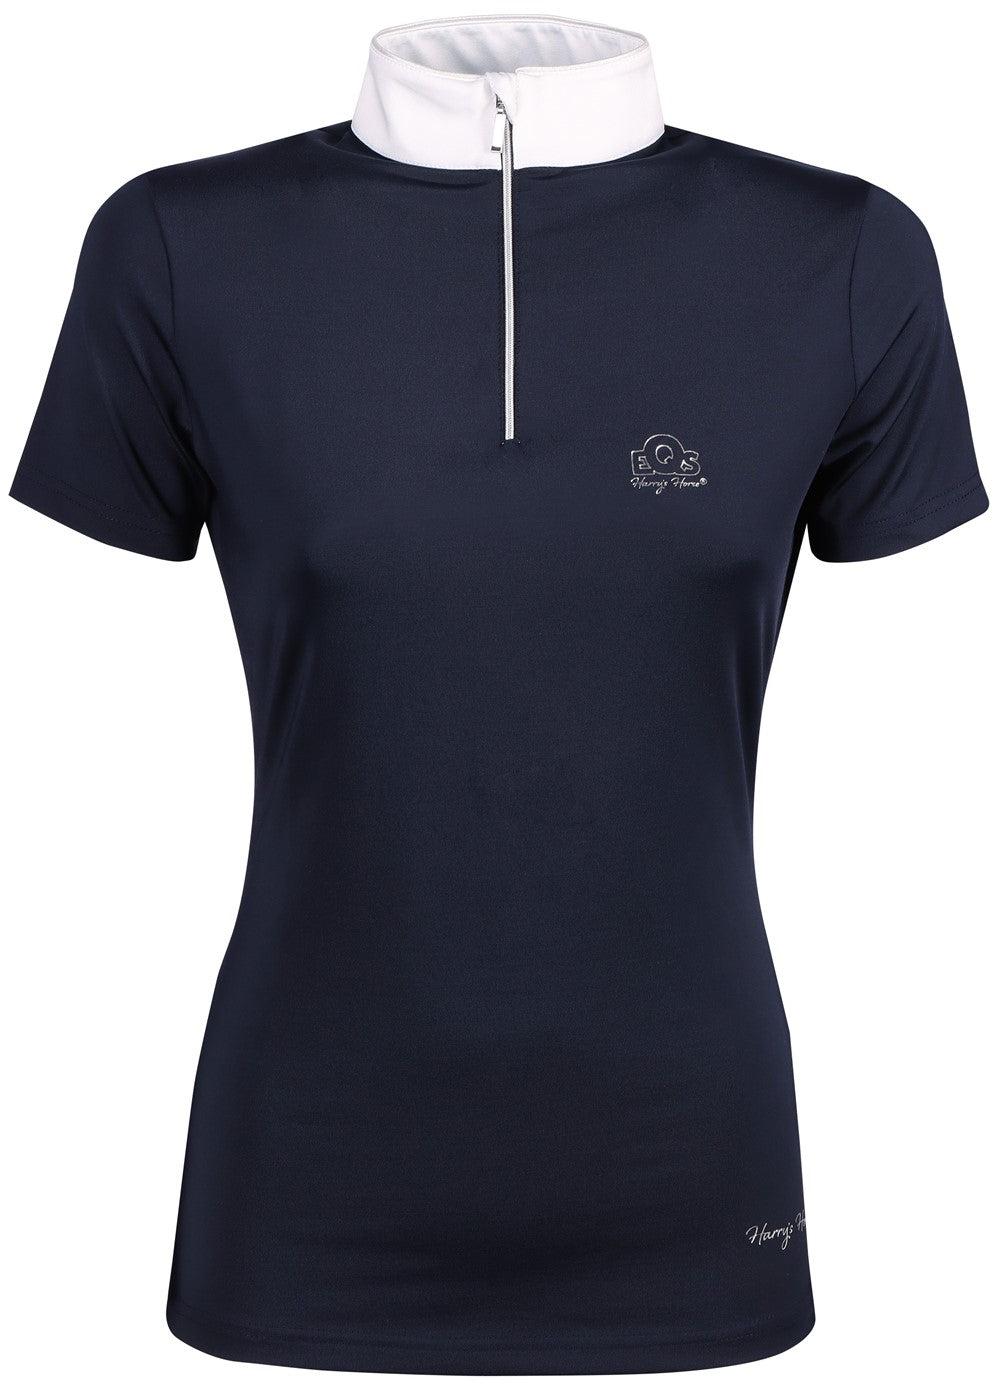 Harry's Horse EQS Silver Competition Shirt